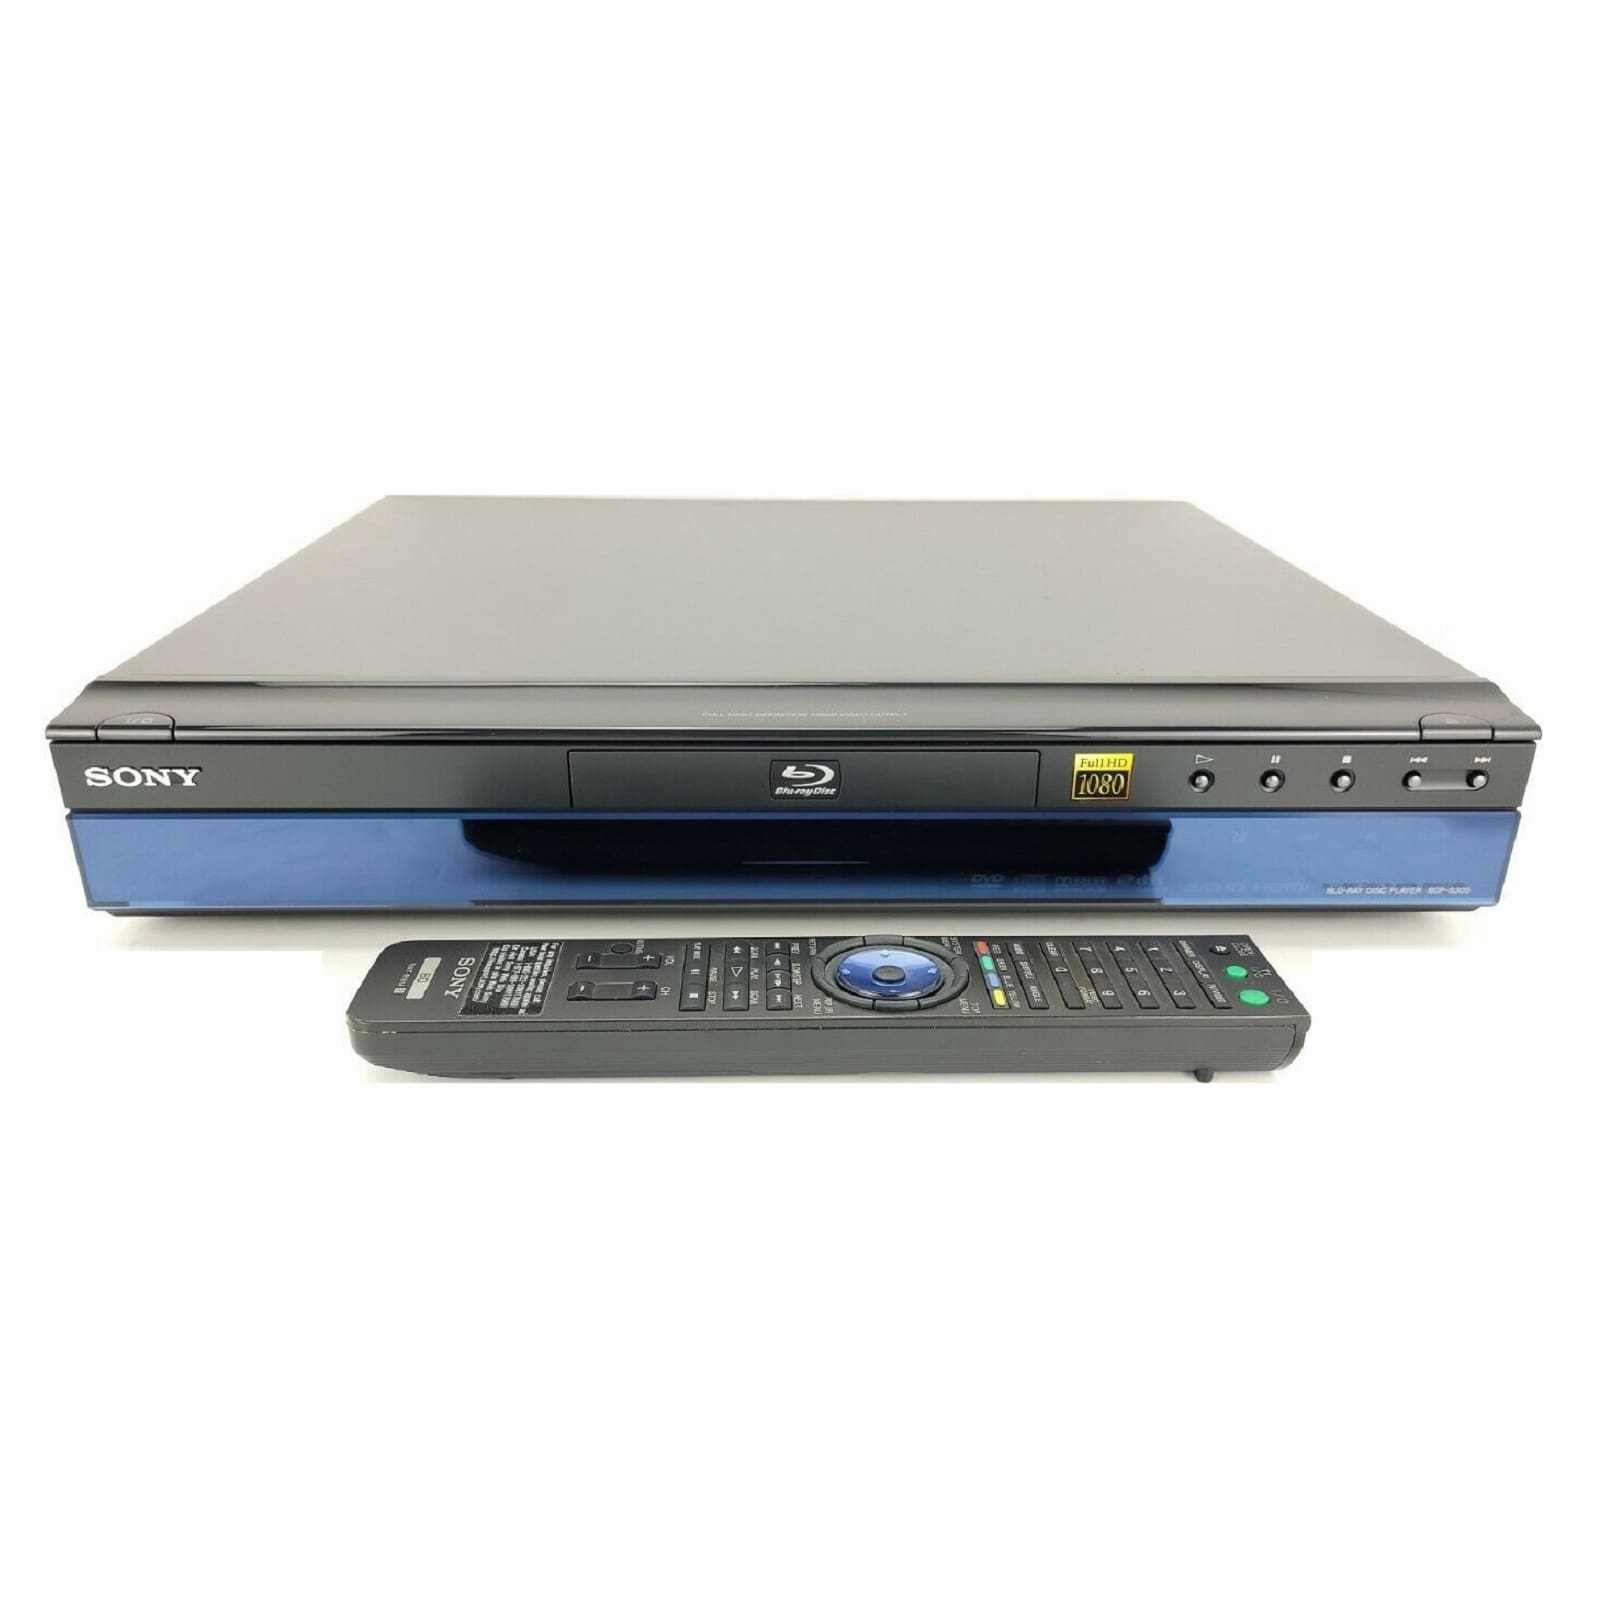 Sony BDP-S301 1080p High Definition Blu-ray Disc Player w/ Remote